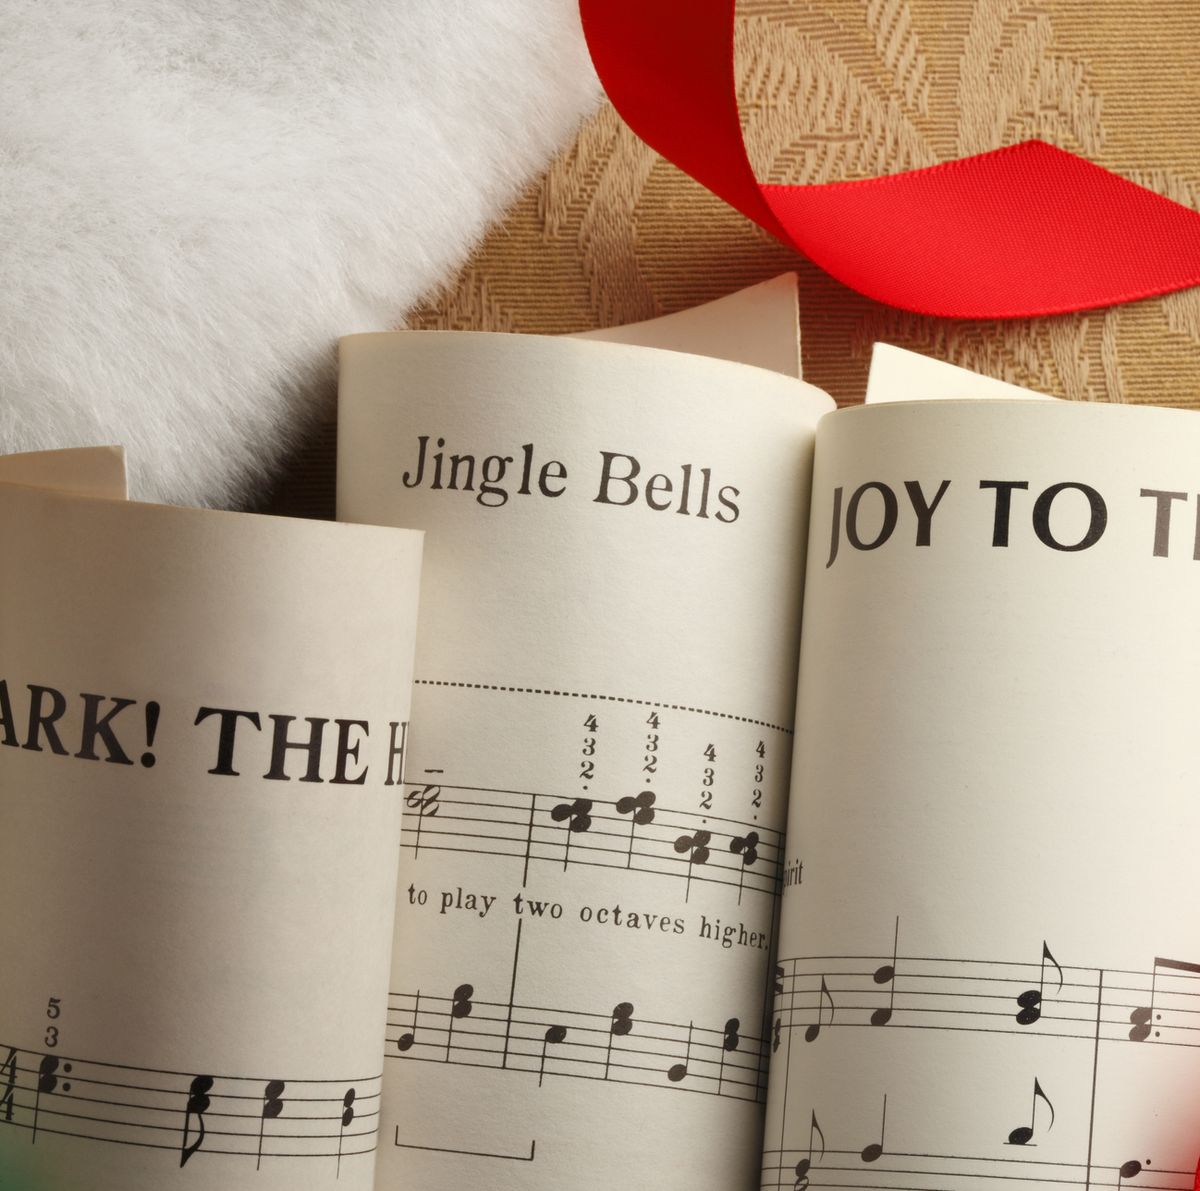 Another Top 10 Christmas tunes list - PlanetChristmas